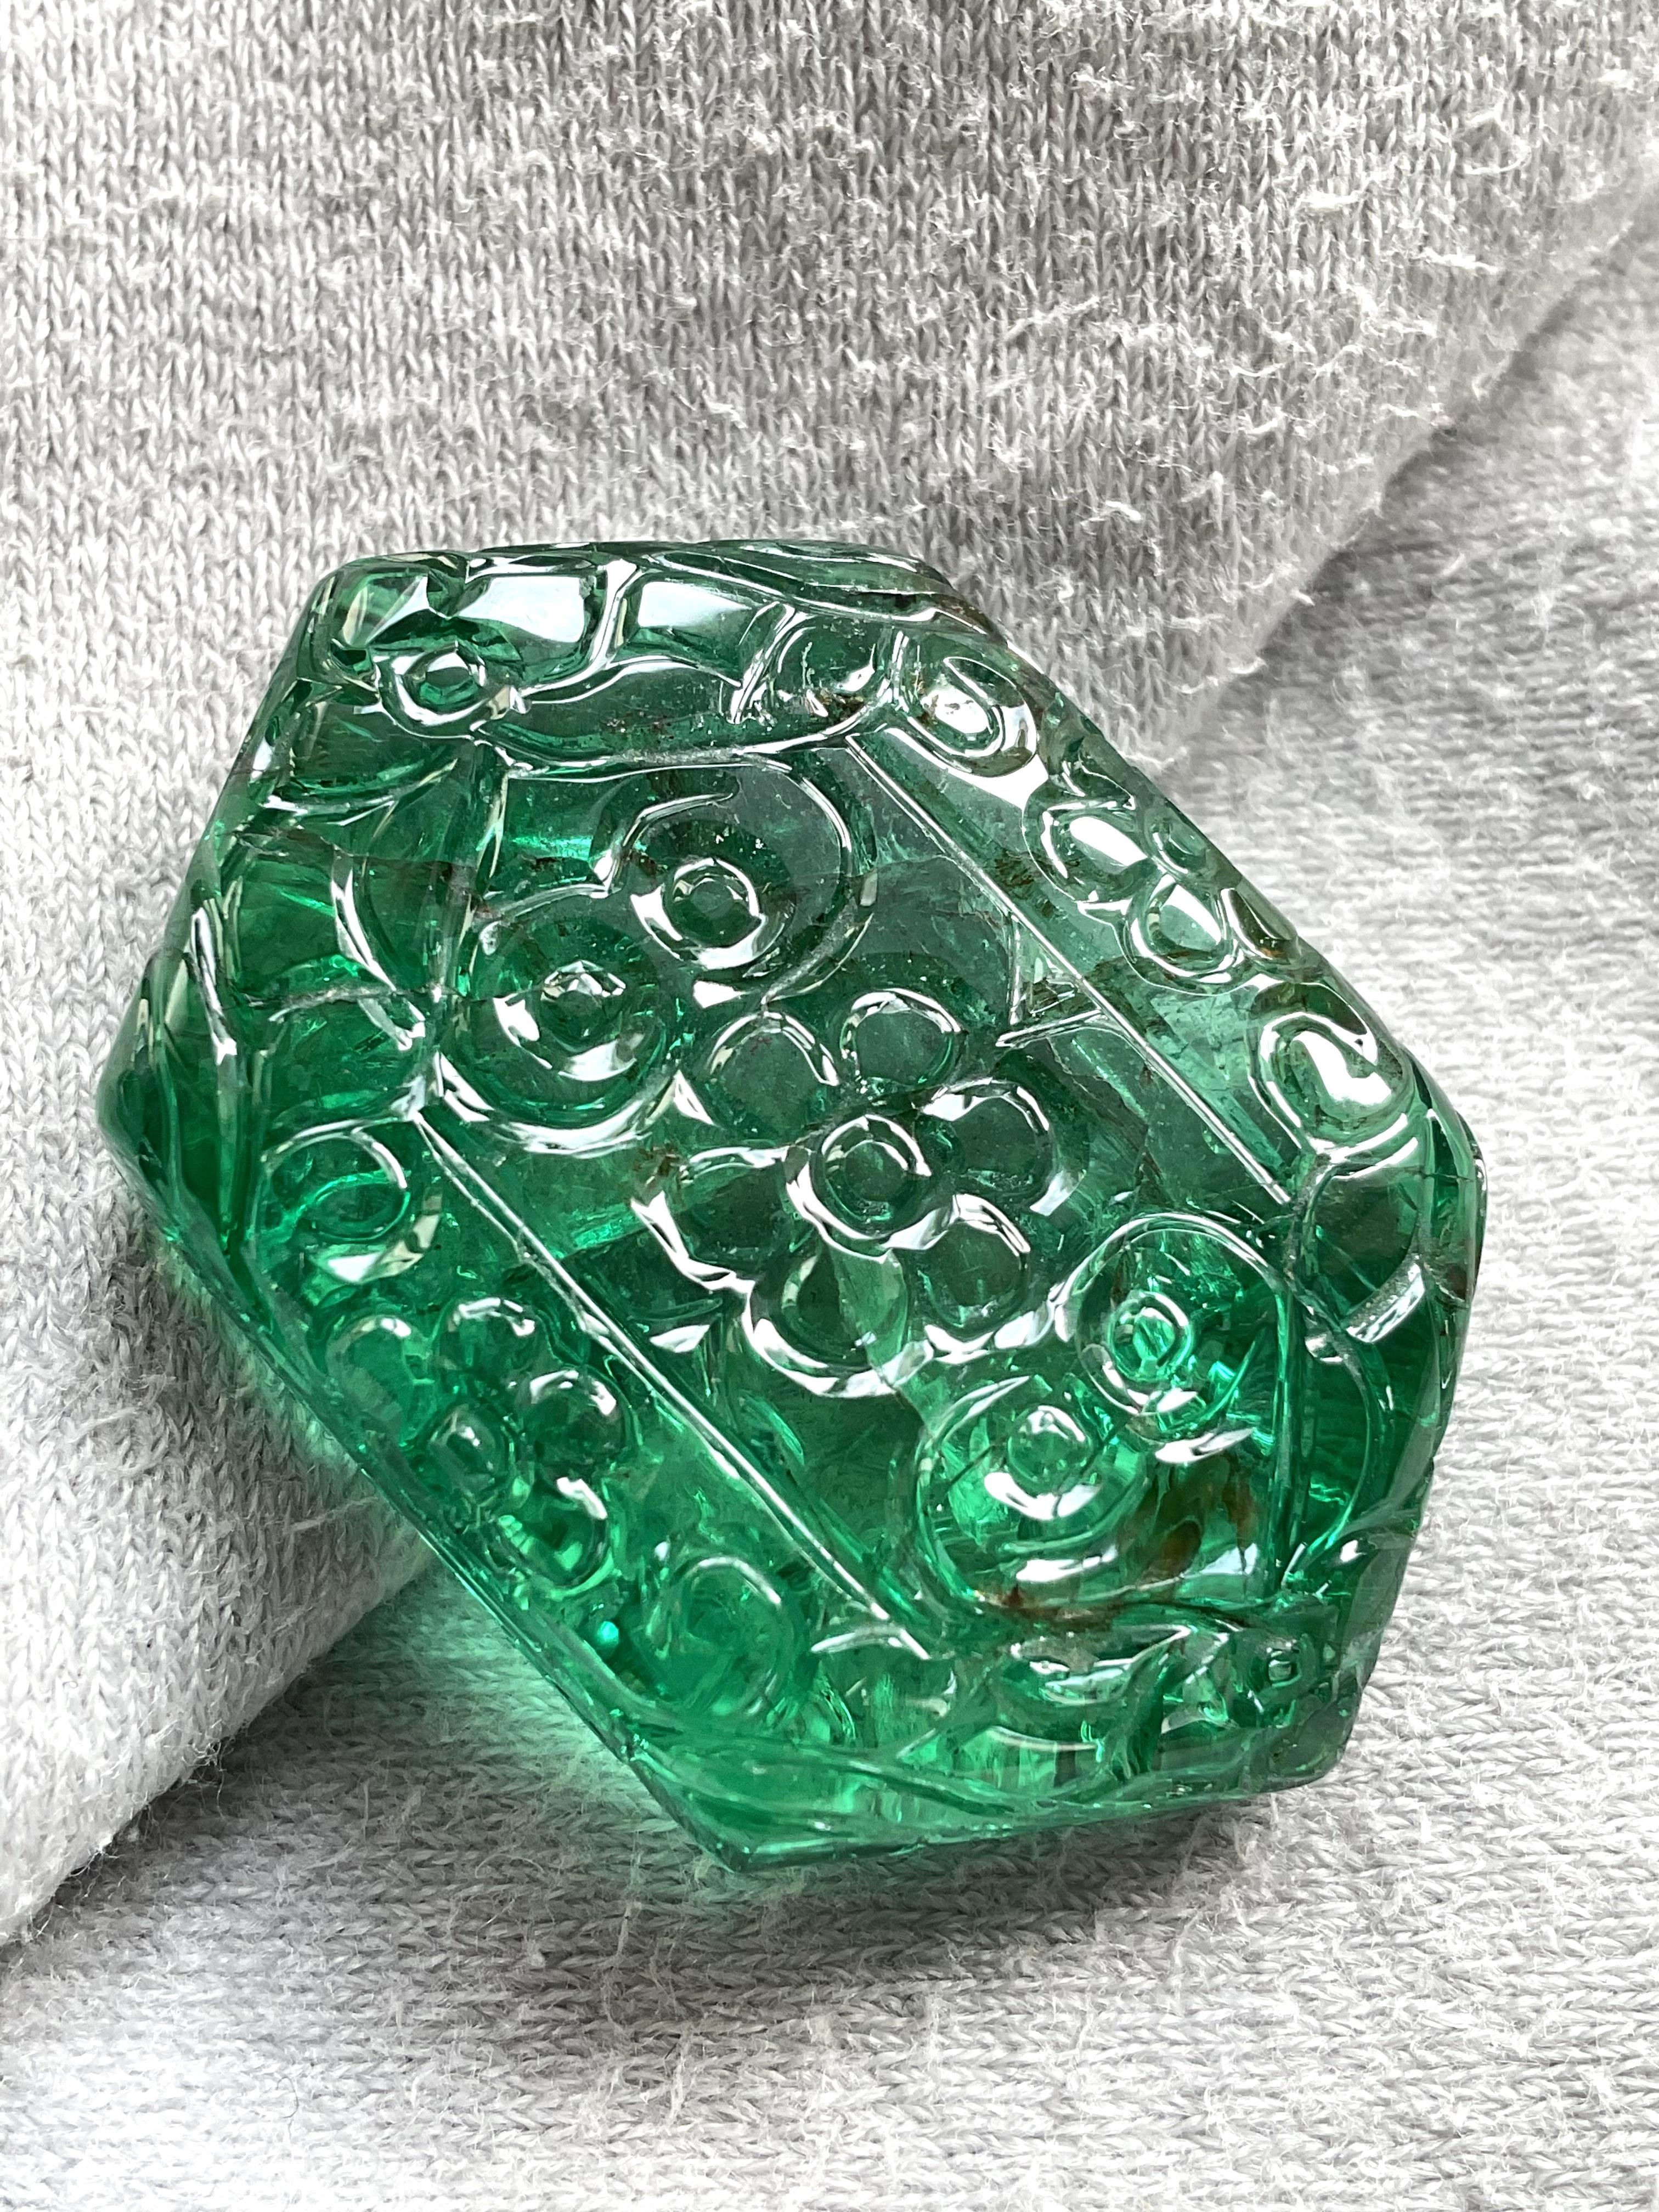 Zambian Emerald Hexagon Carved Gem Quality High Jewelry Gemstone 83.3 Carats For Sale 1